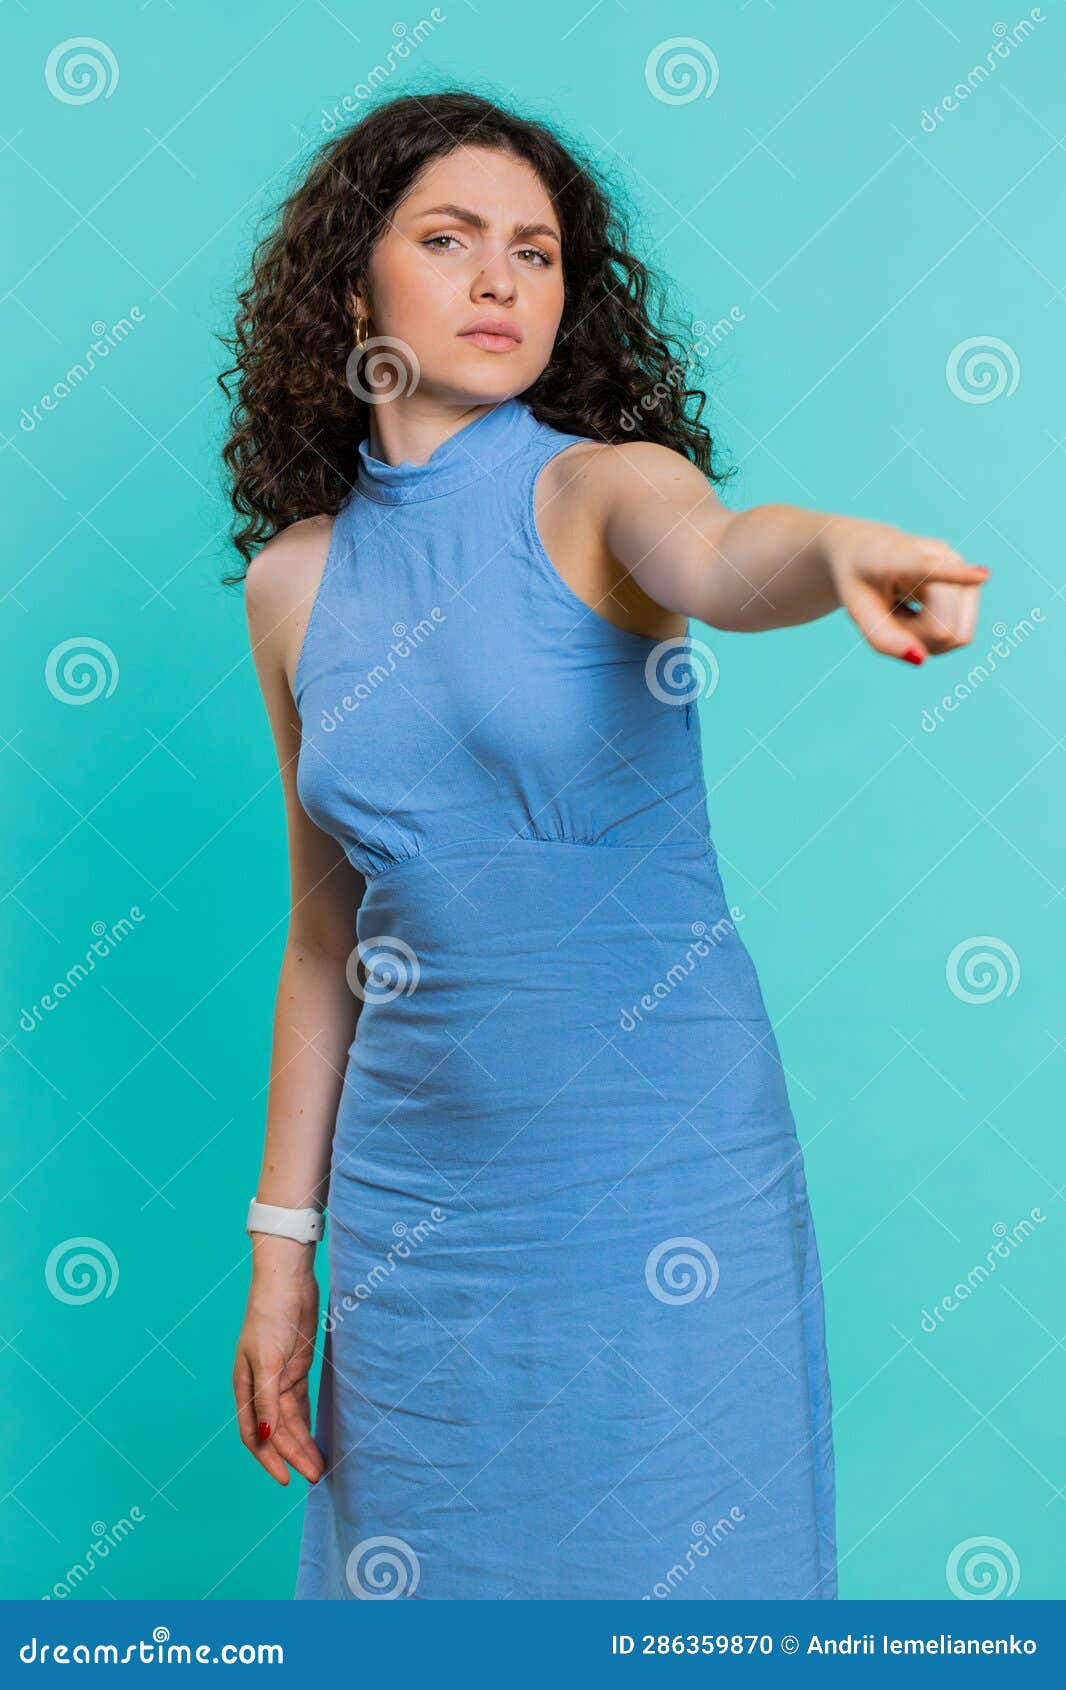 Caucasian Woman Pointing Finger Away Asking To Leave Her Alone Strict Boss Firing Conflict